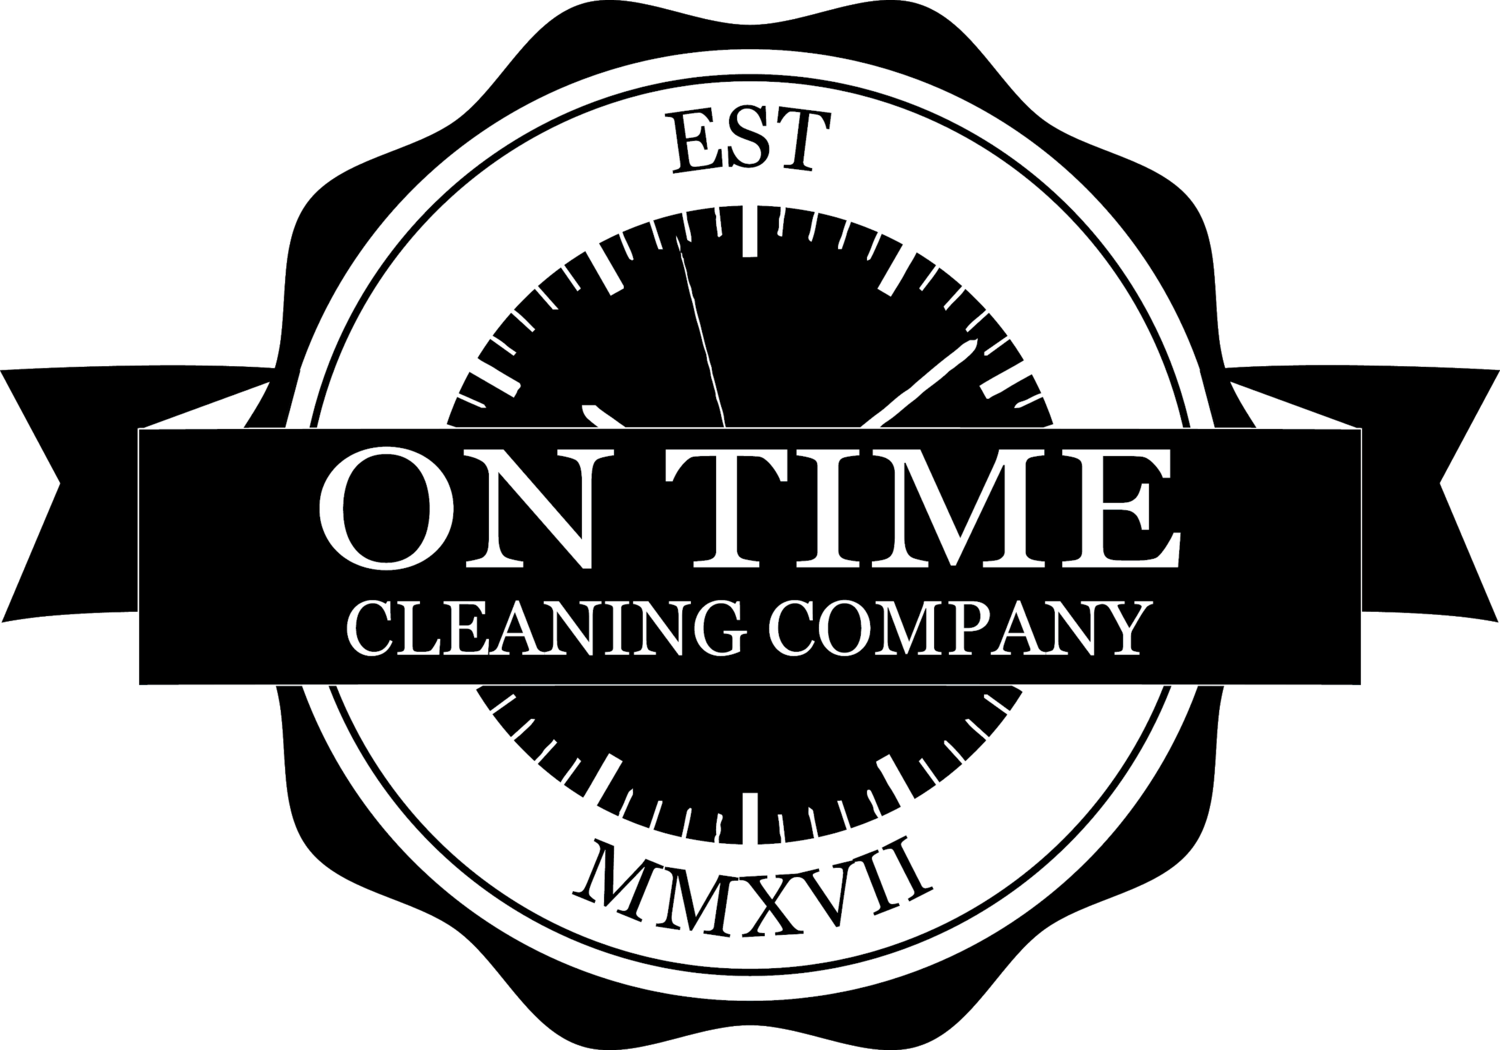 On Time Cleaning Company